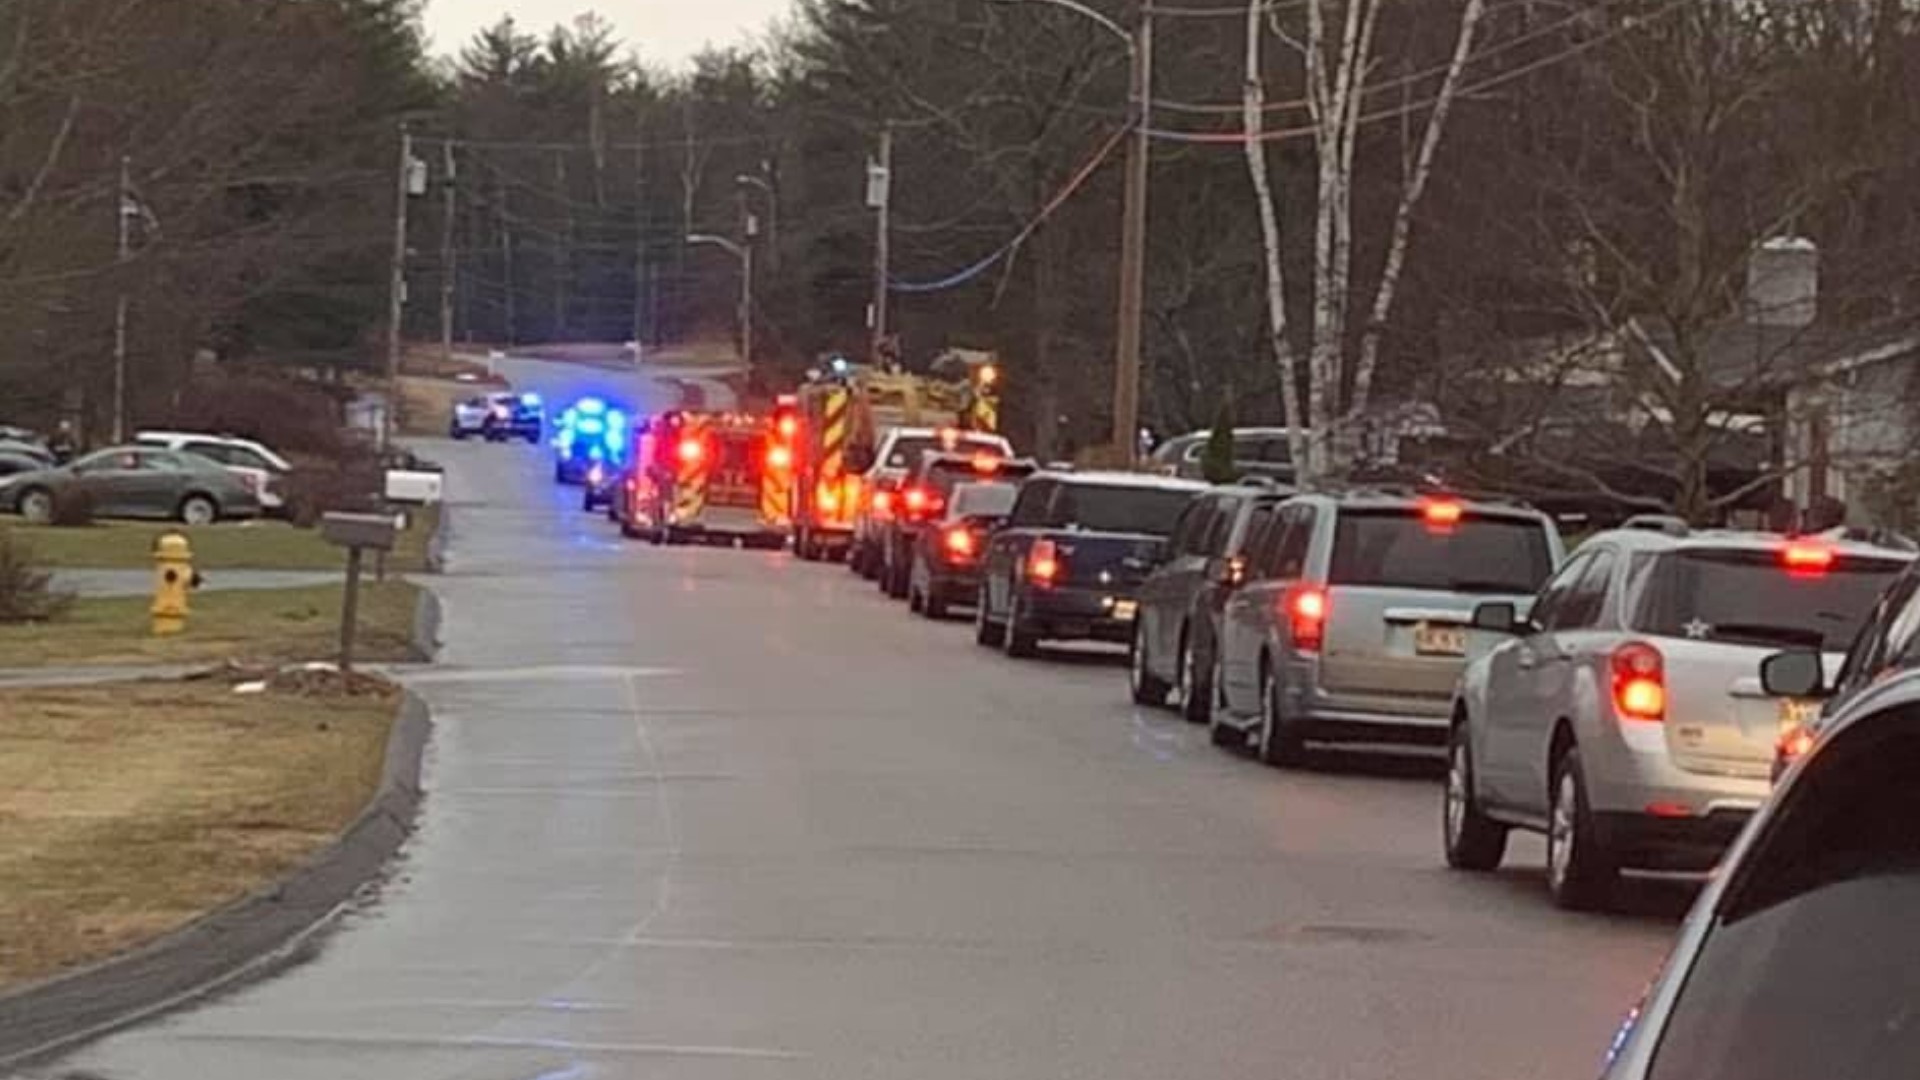 Maine communities are helping kids celebrate their birthdays with parades instead of parties as a precaution against COVID-19.